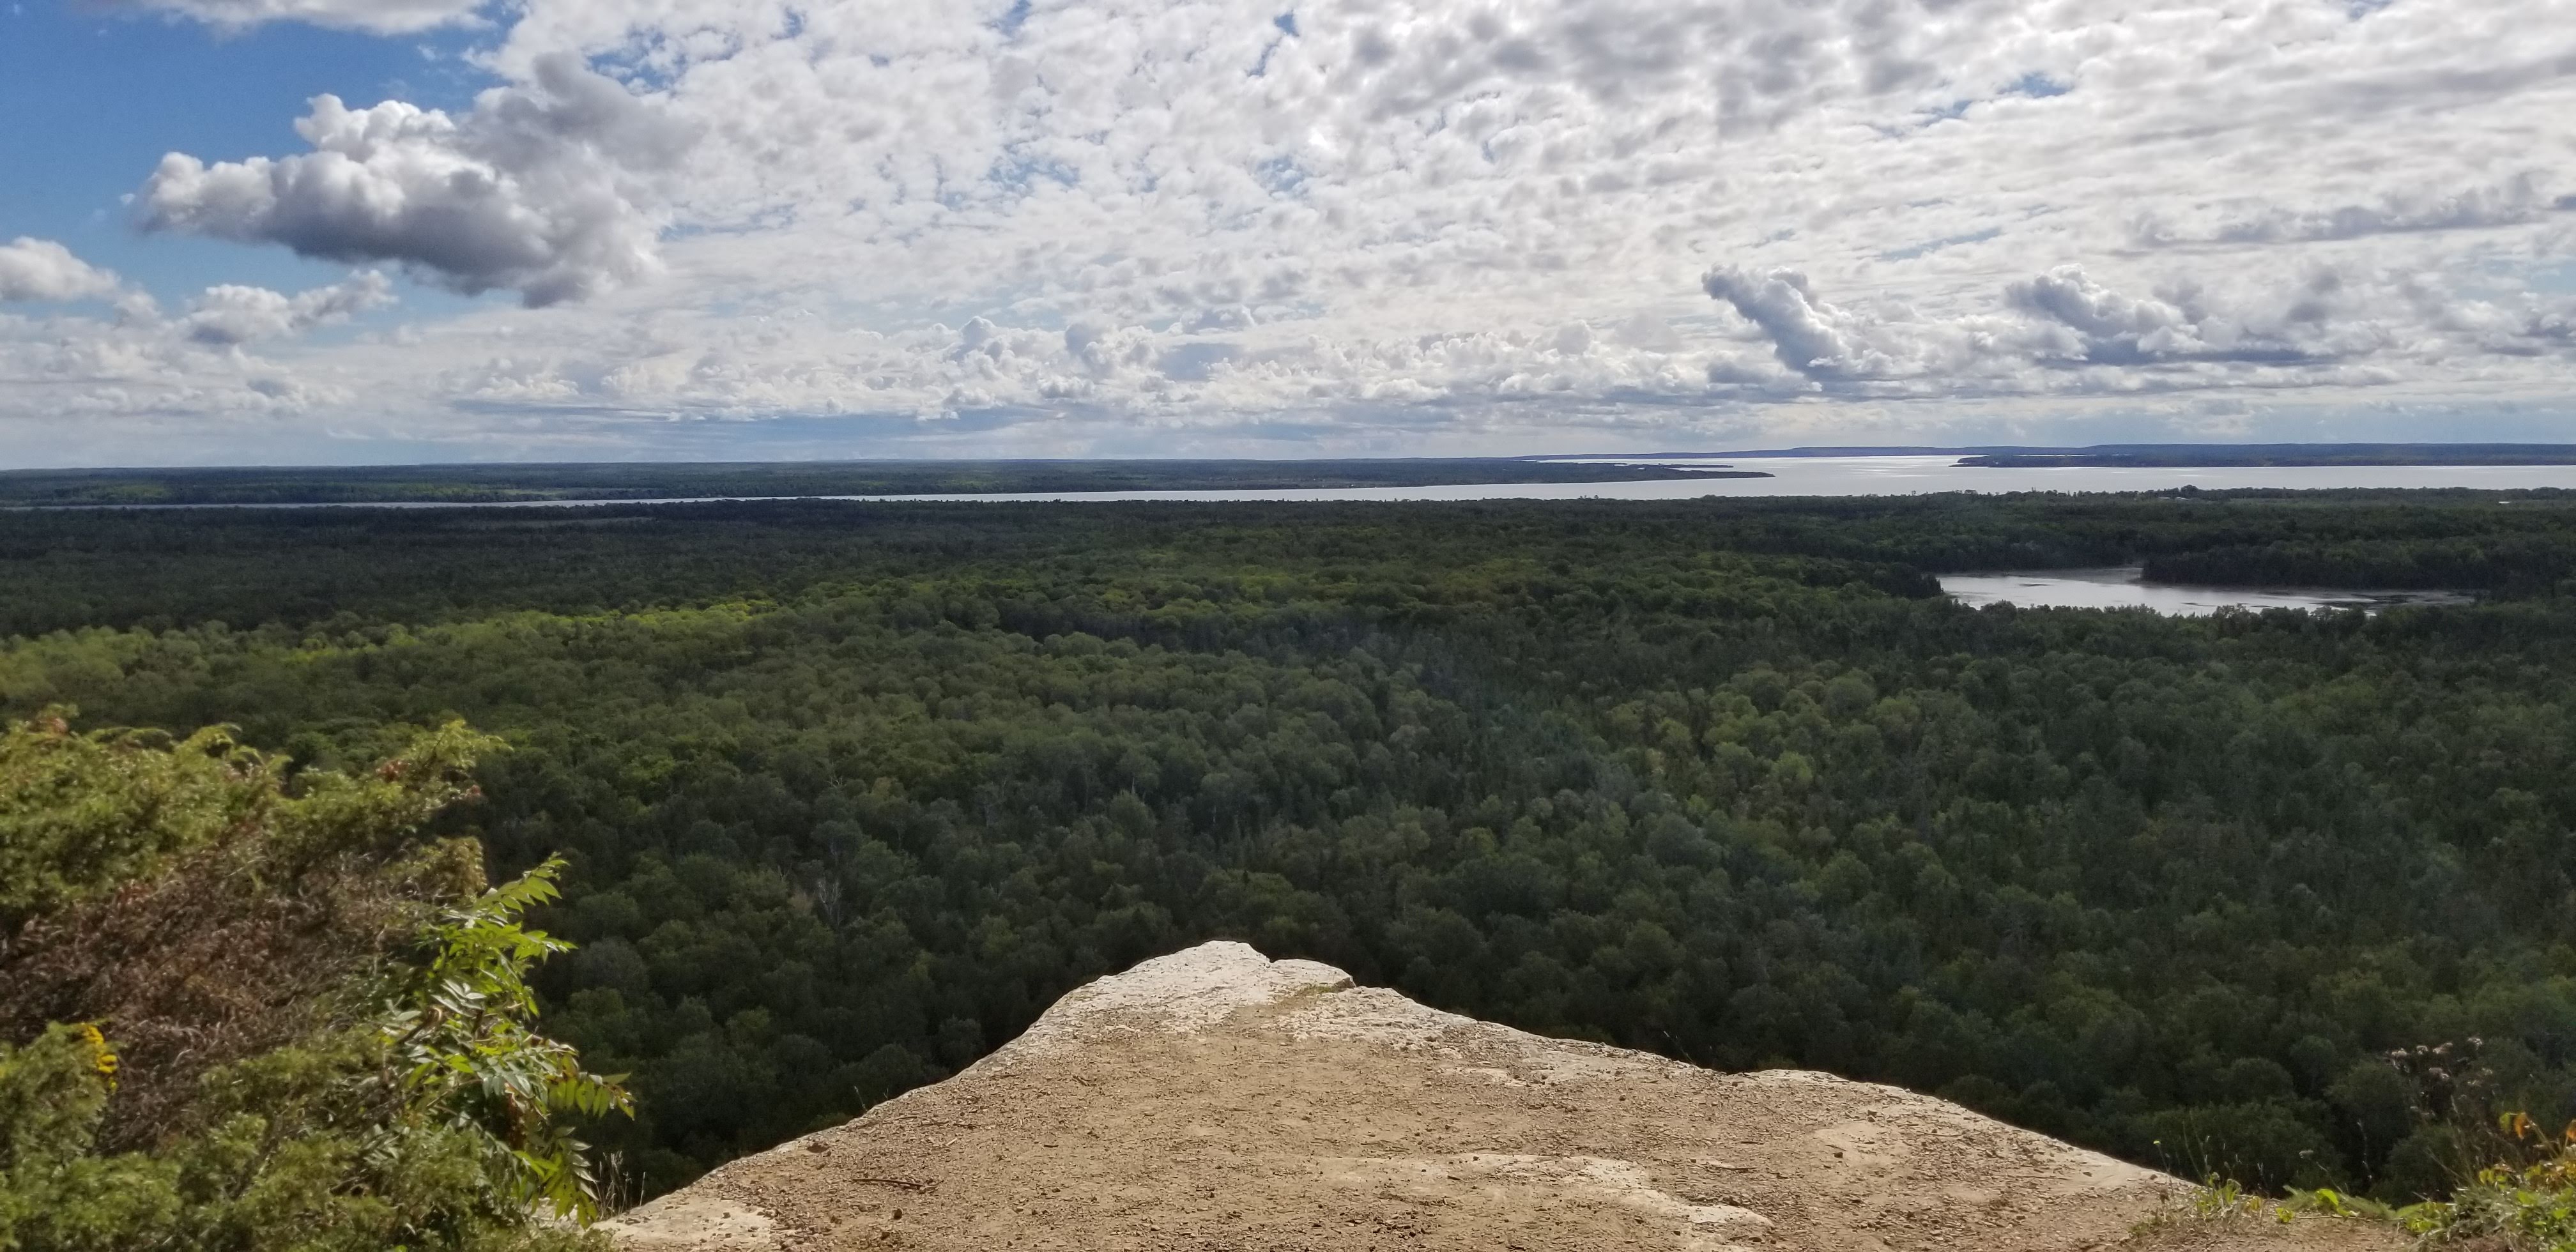 View of trees and lakes from the Cup and Saucer Trail